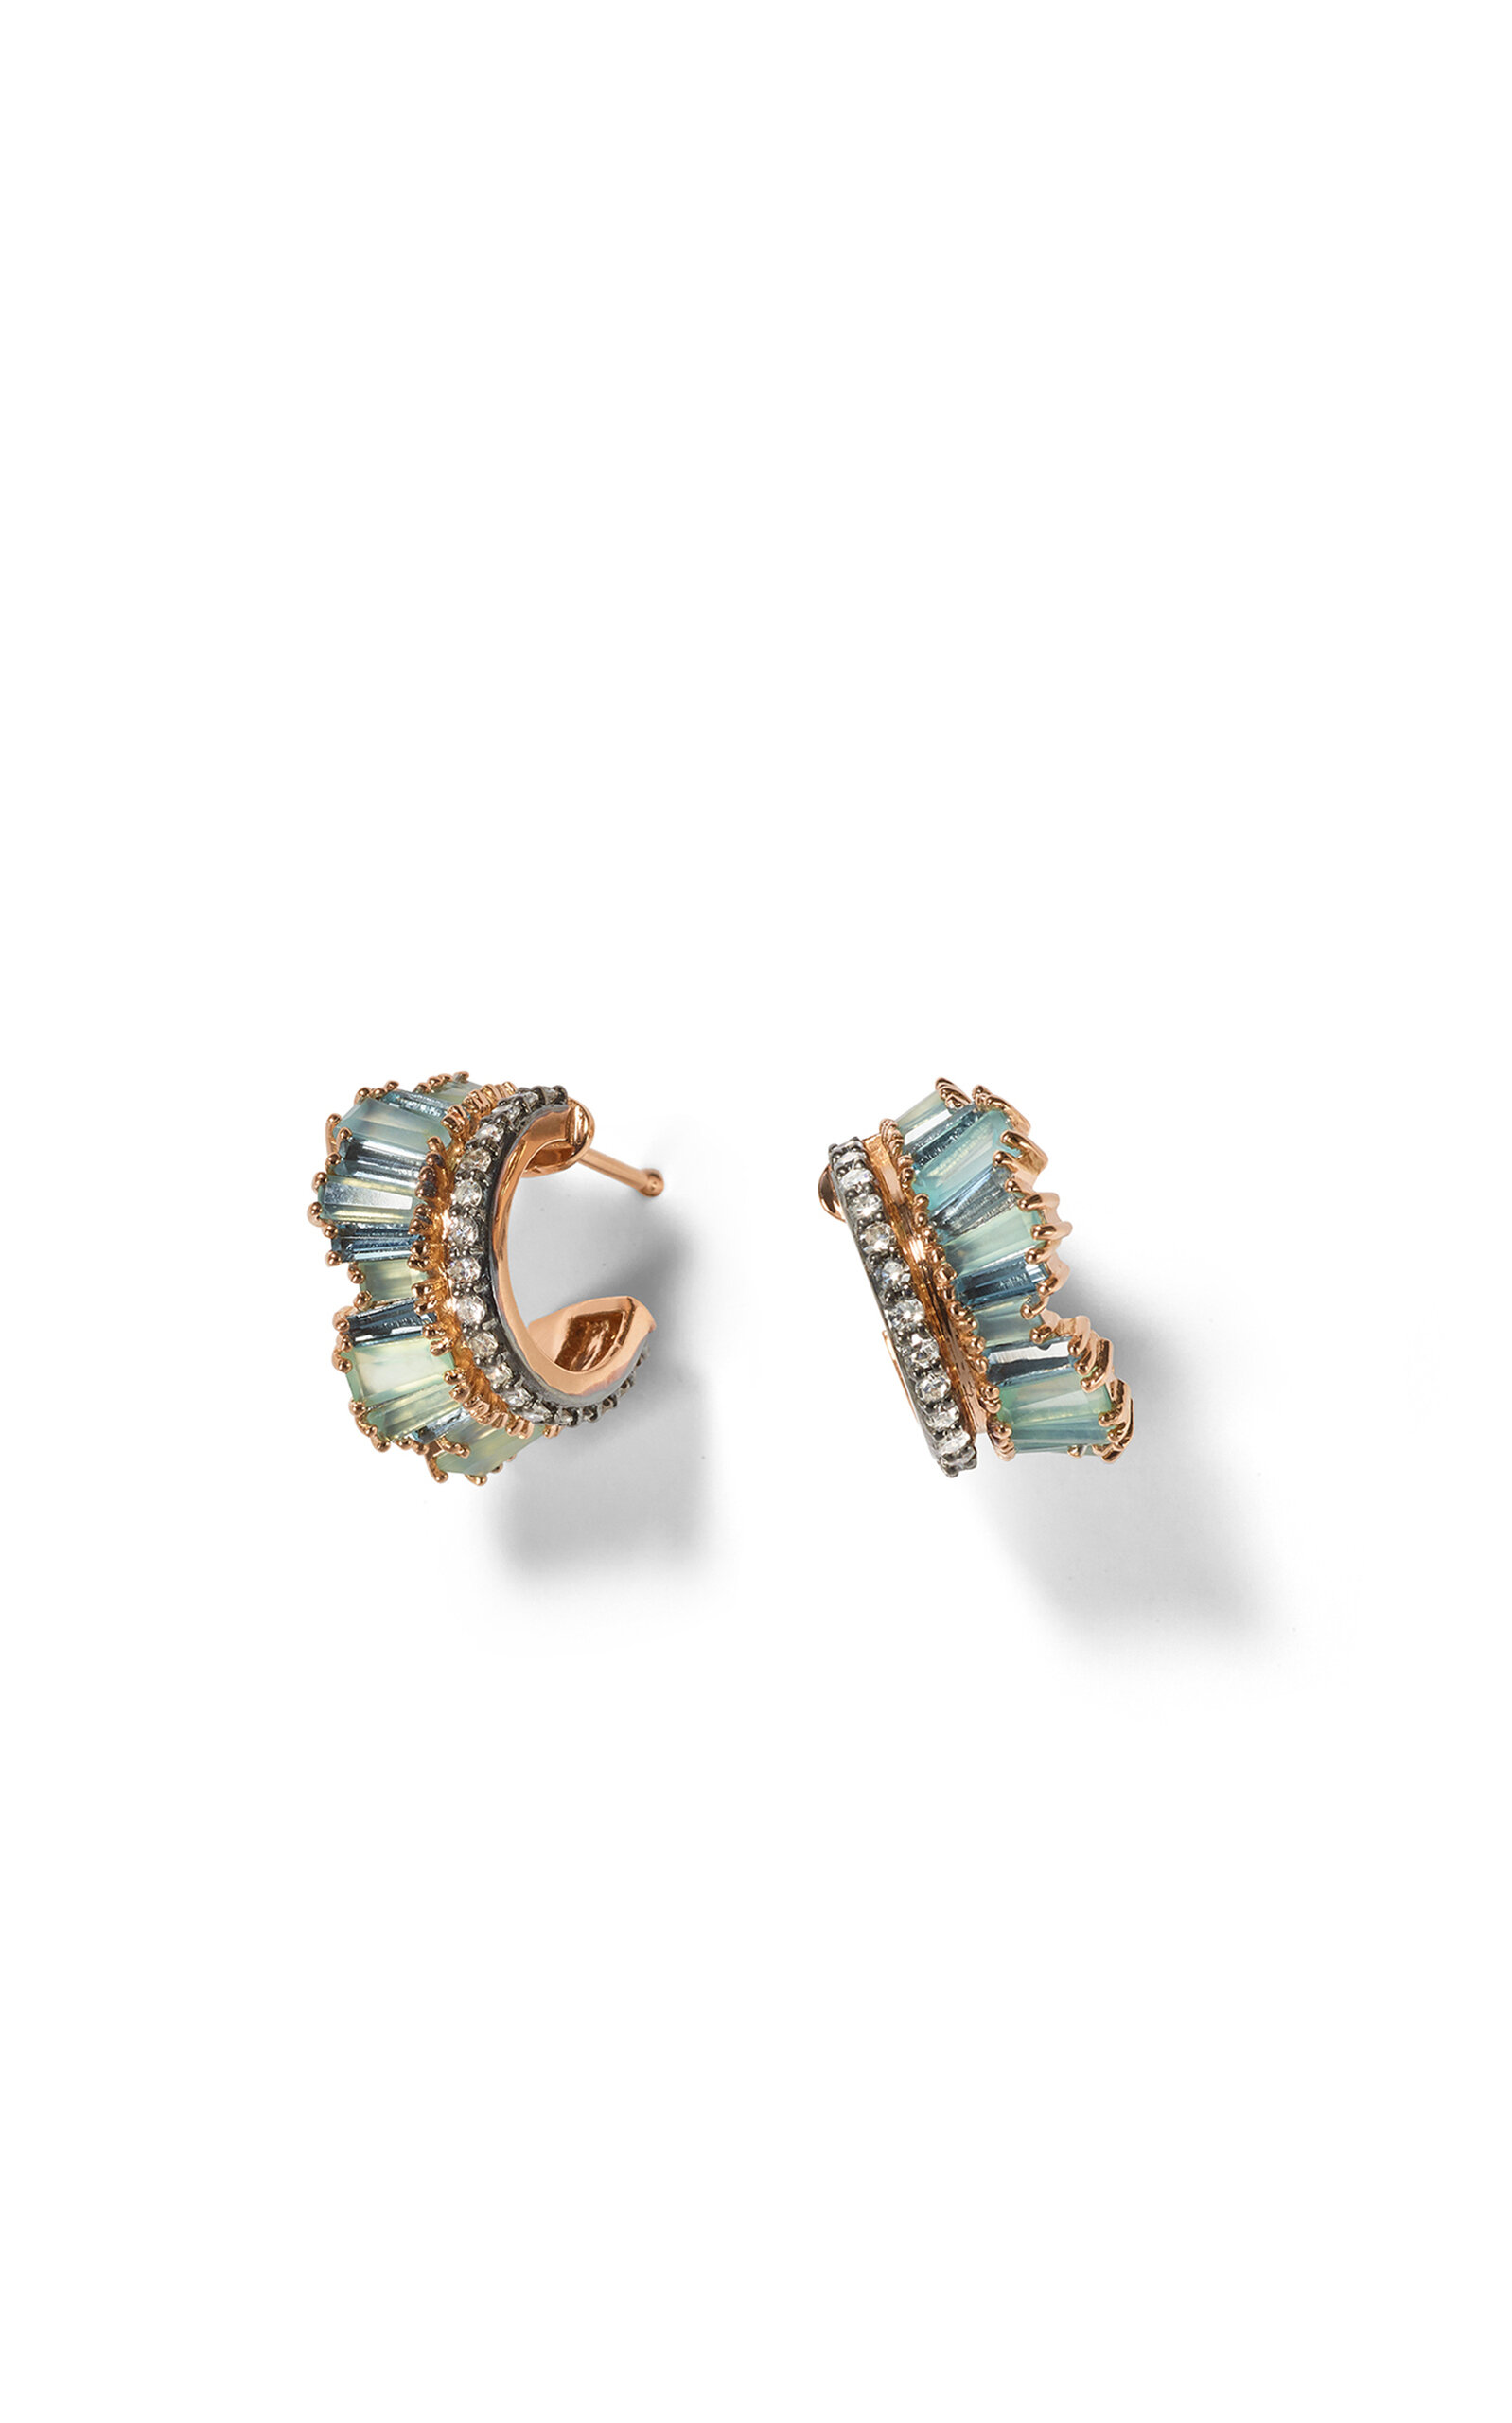 Nak armstrong petite ruched 20k rose gold opal and diamond hoop earrings